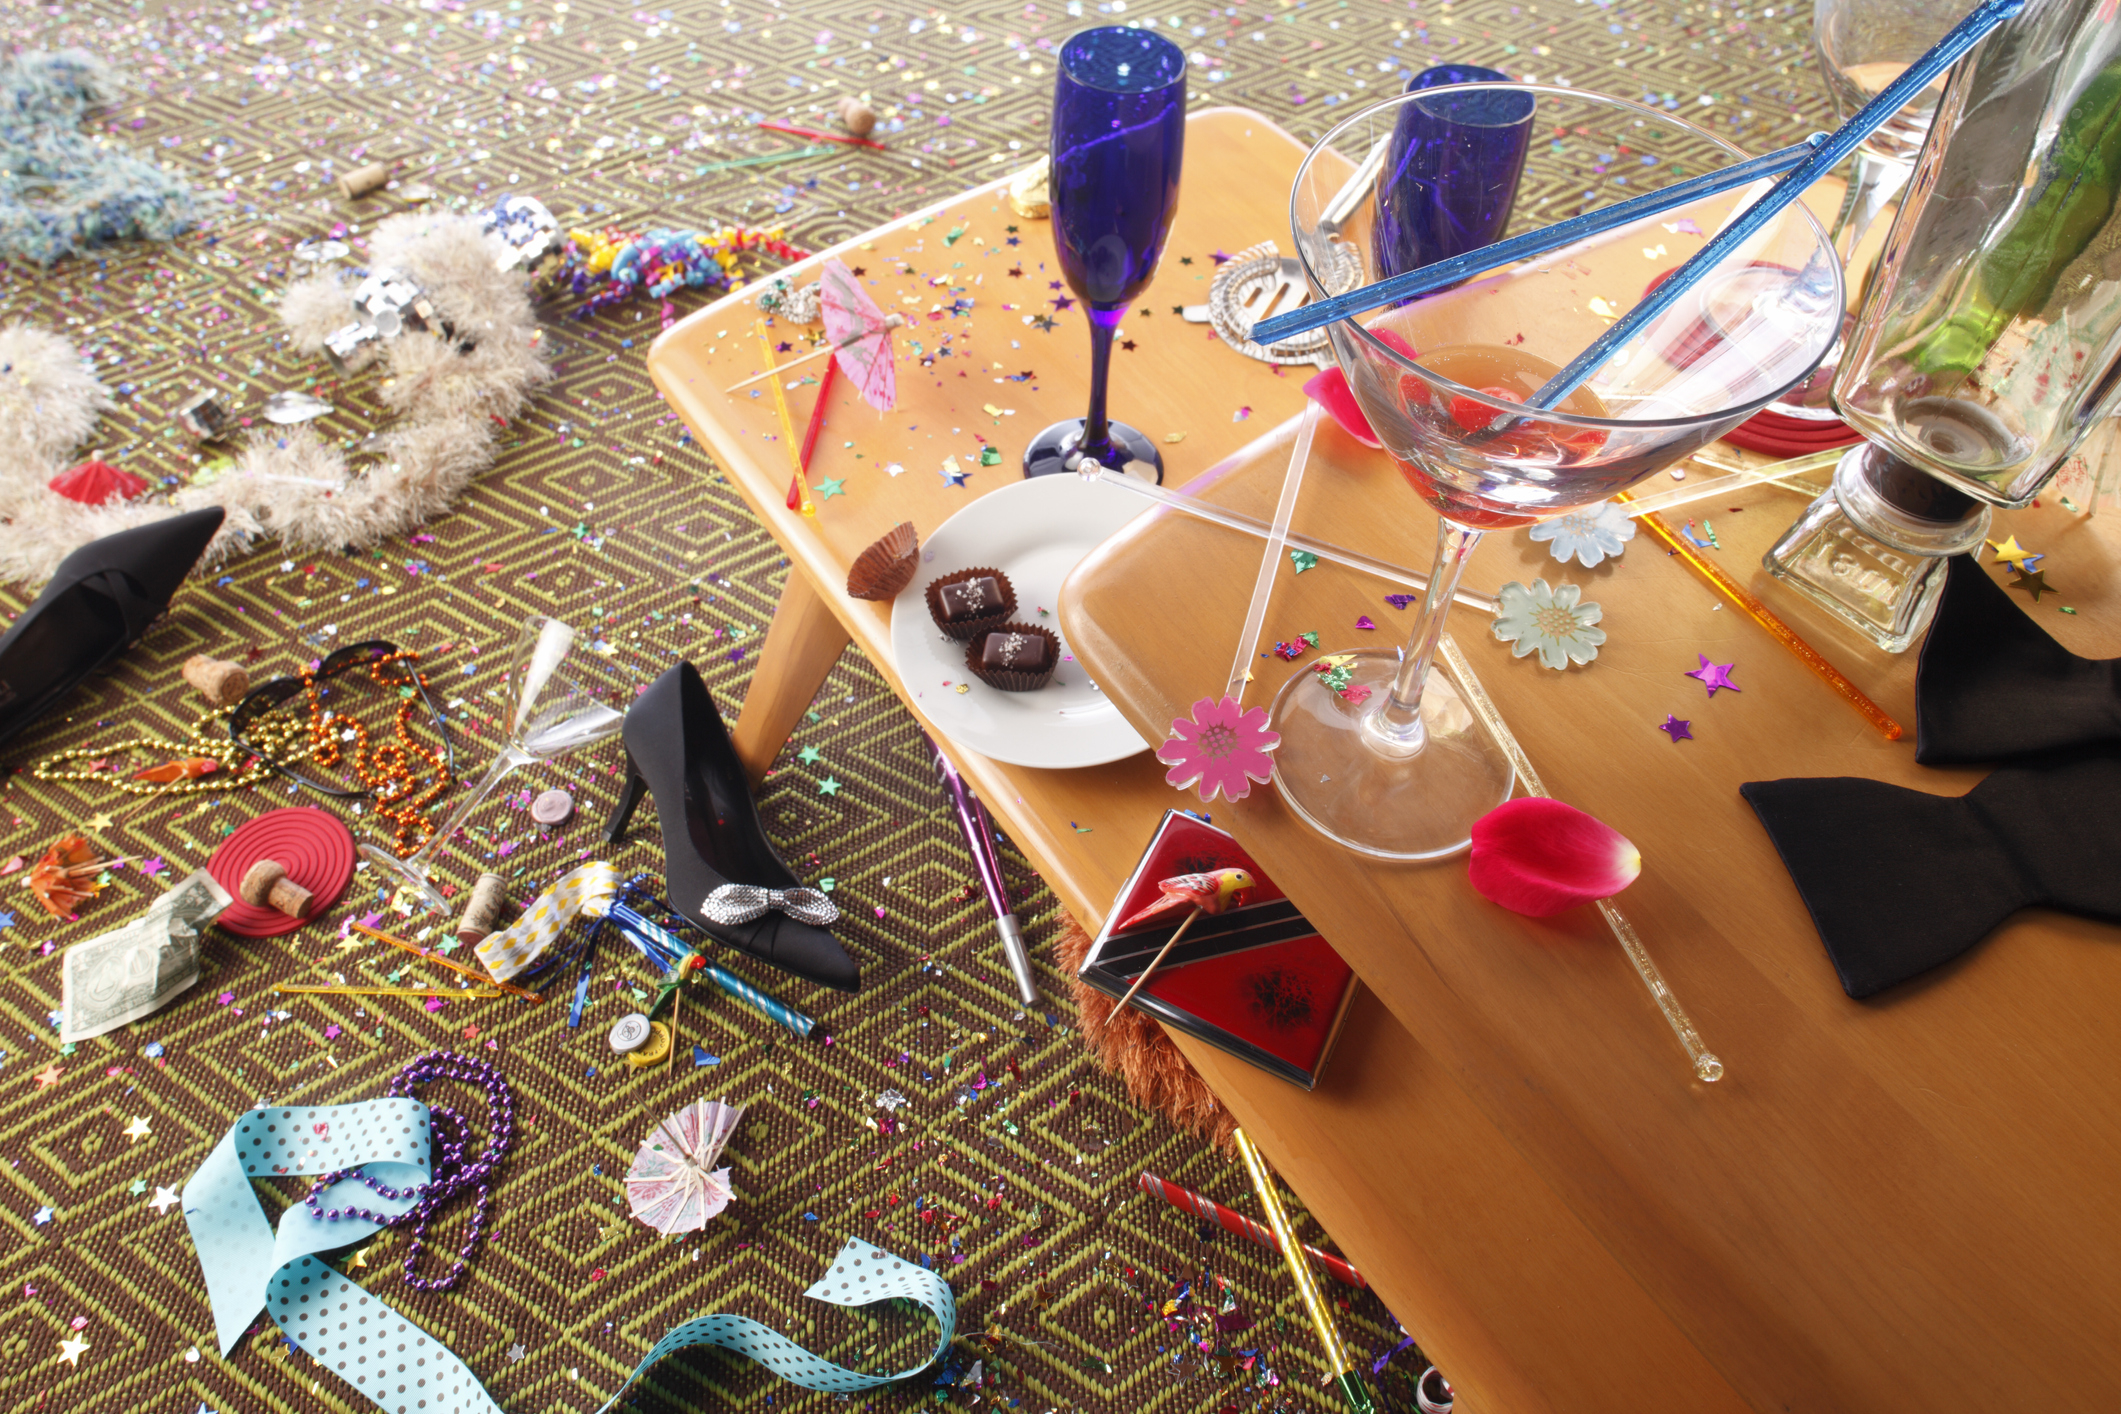 After-party table with scattered party hats, cups, beads, and confetti